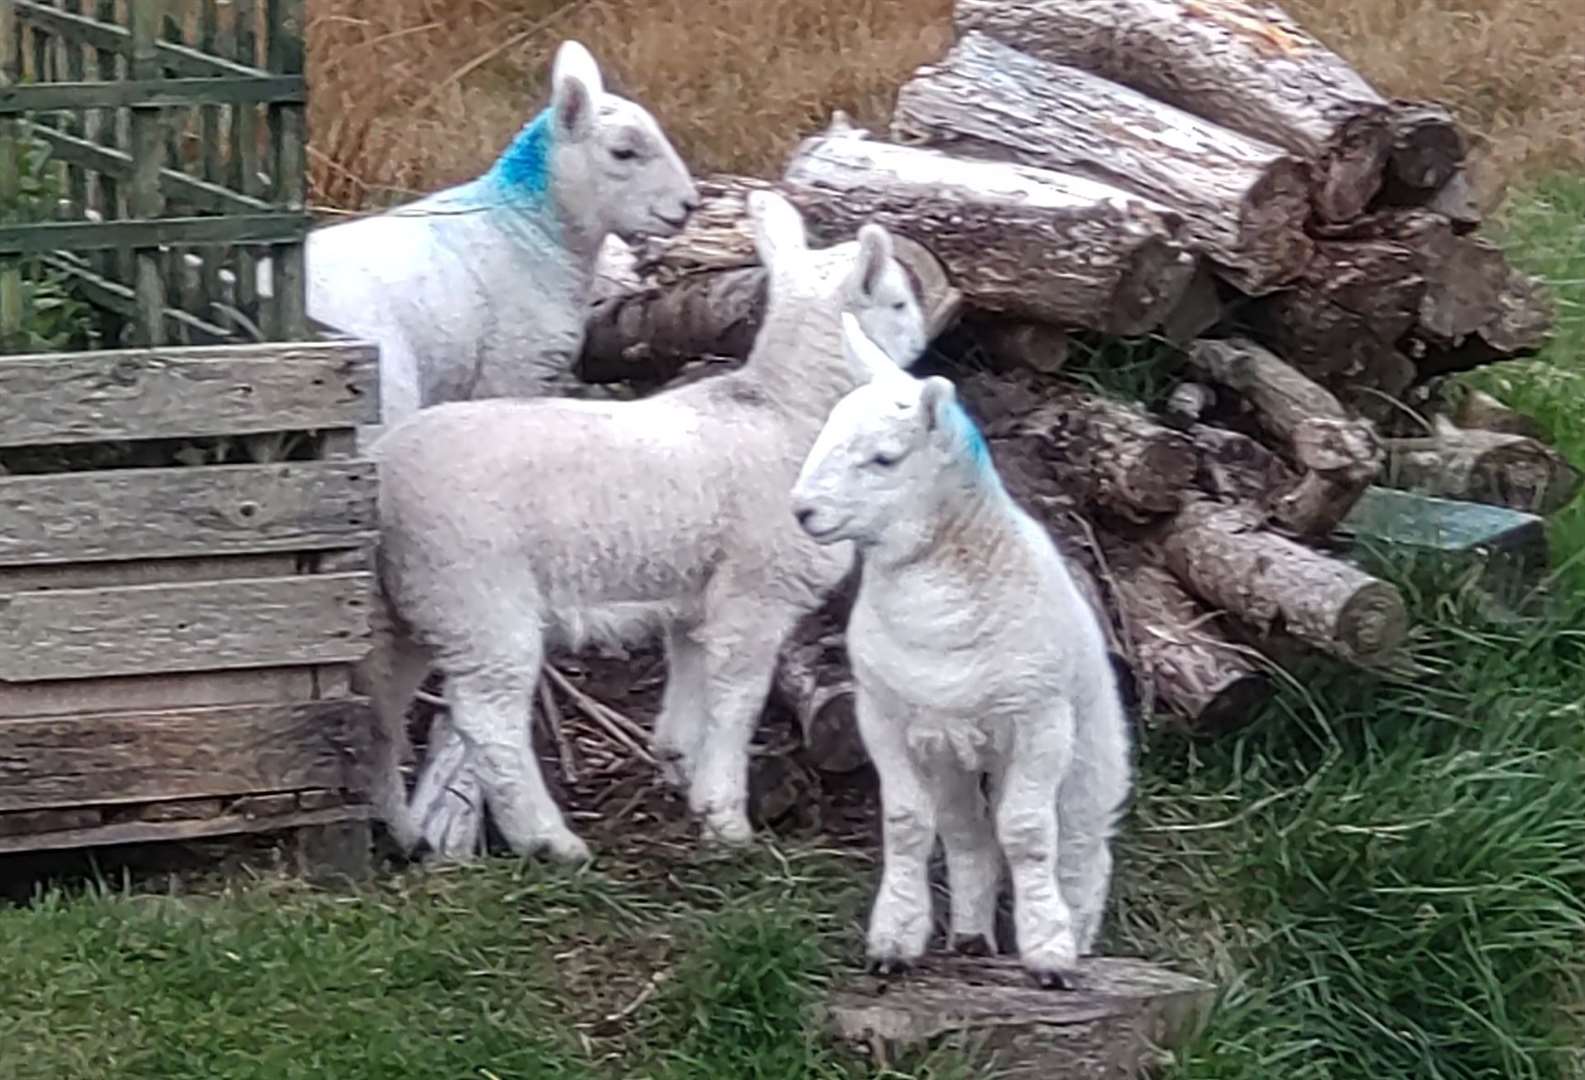 Torrisdale lambs outside my house